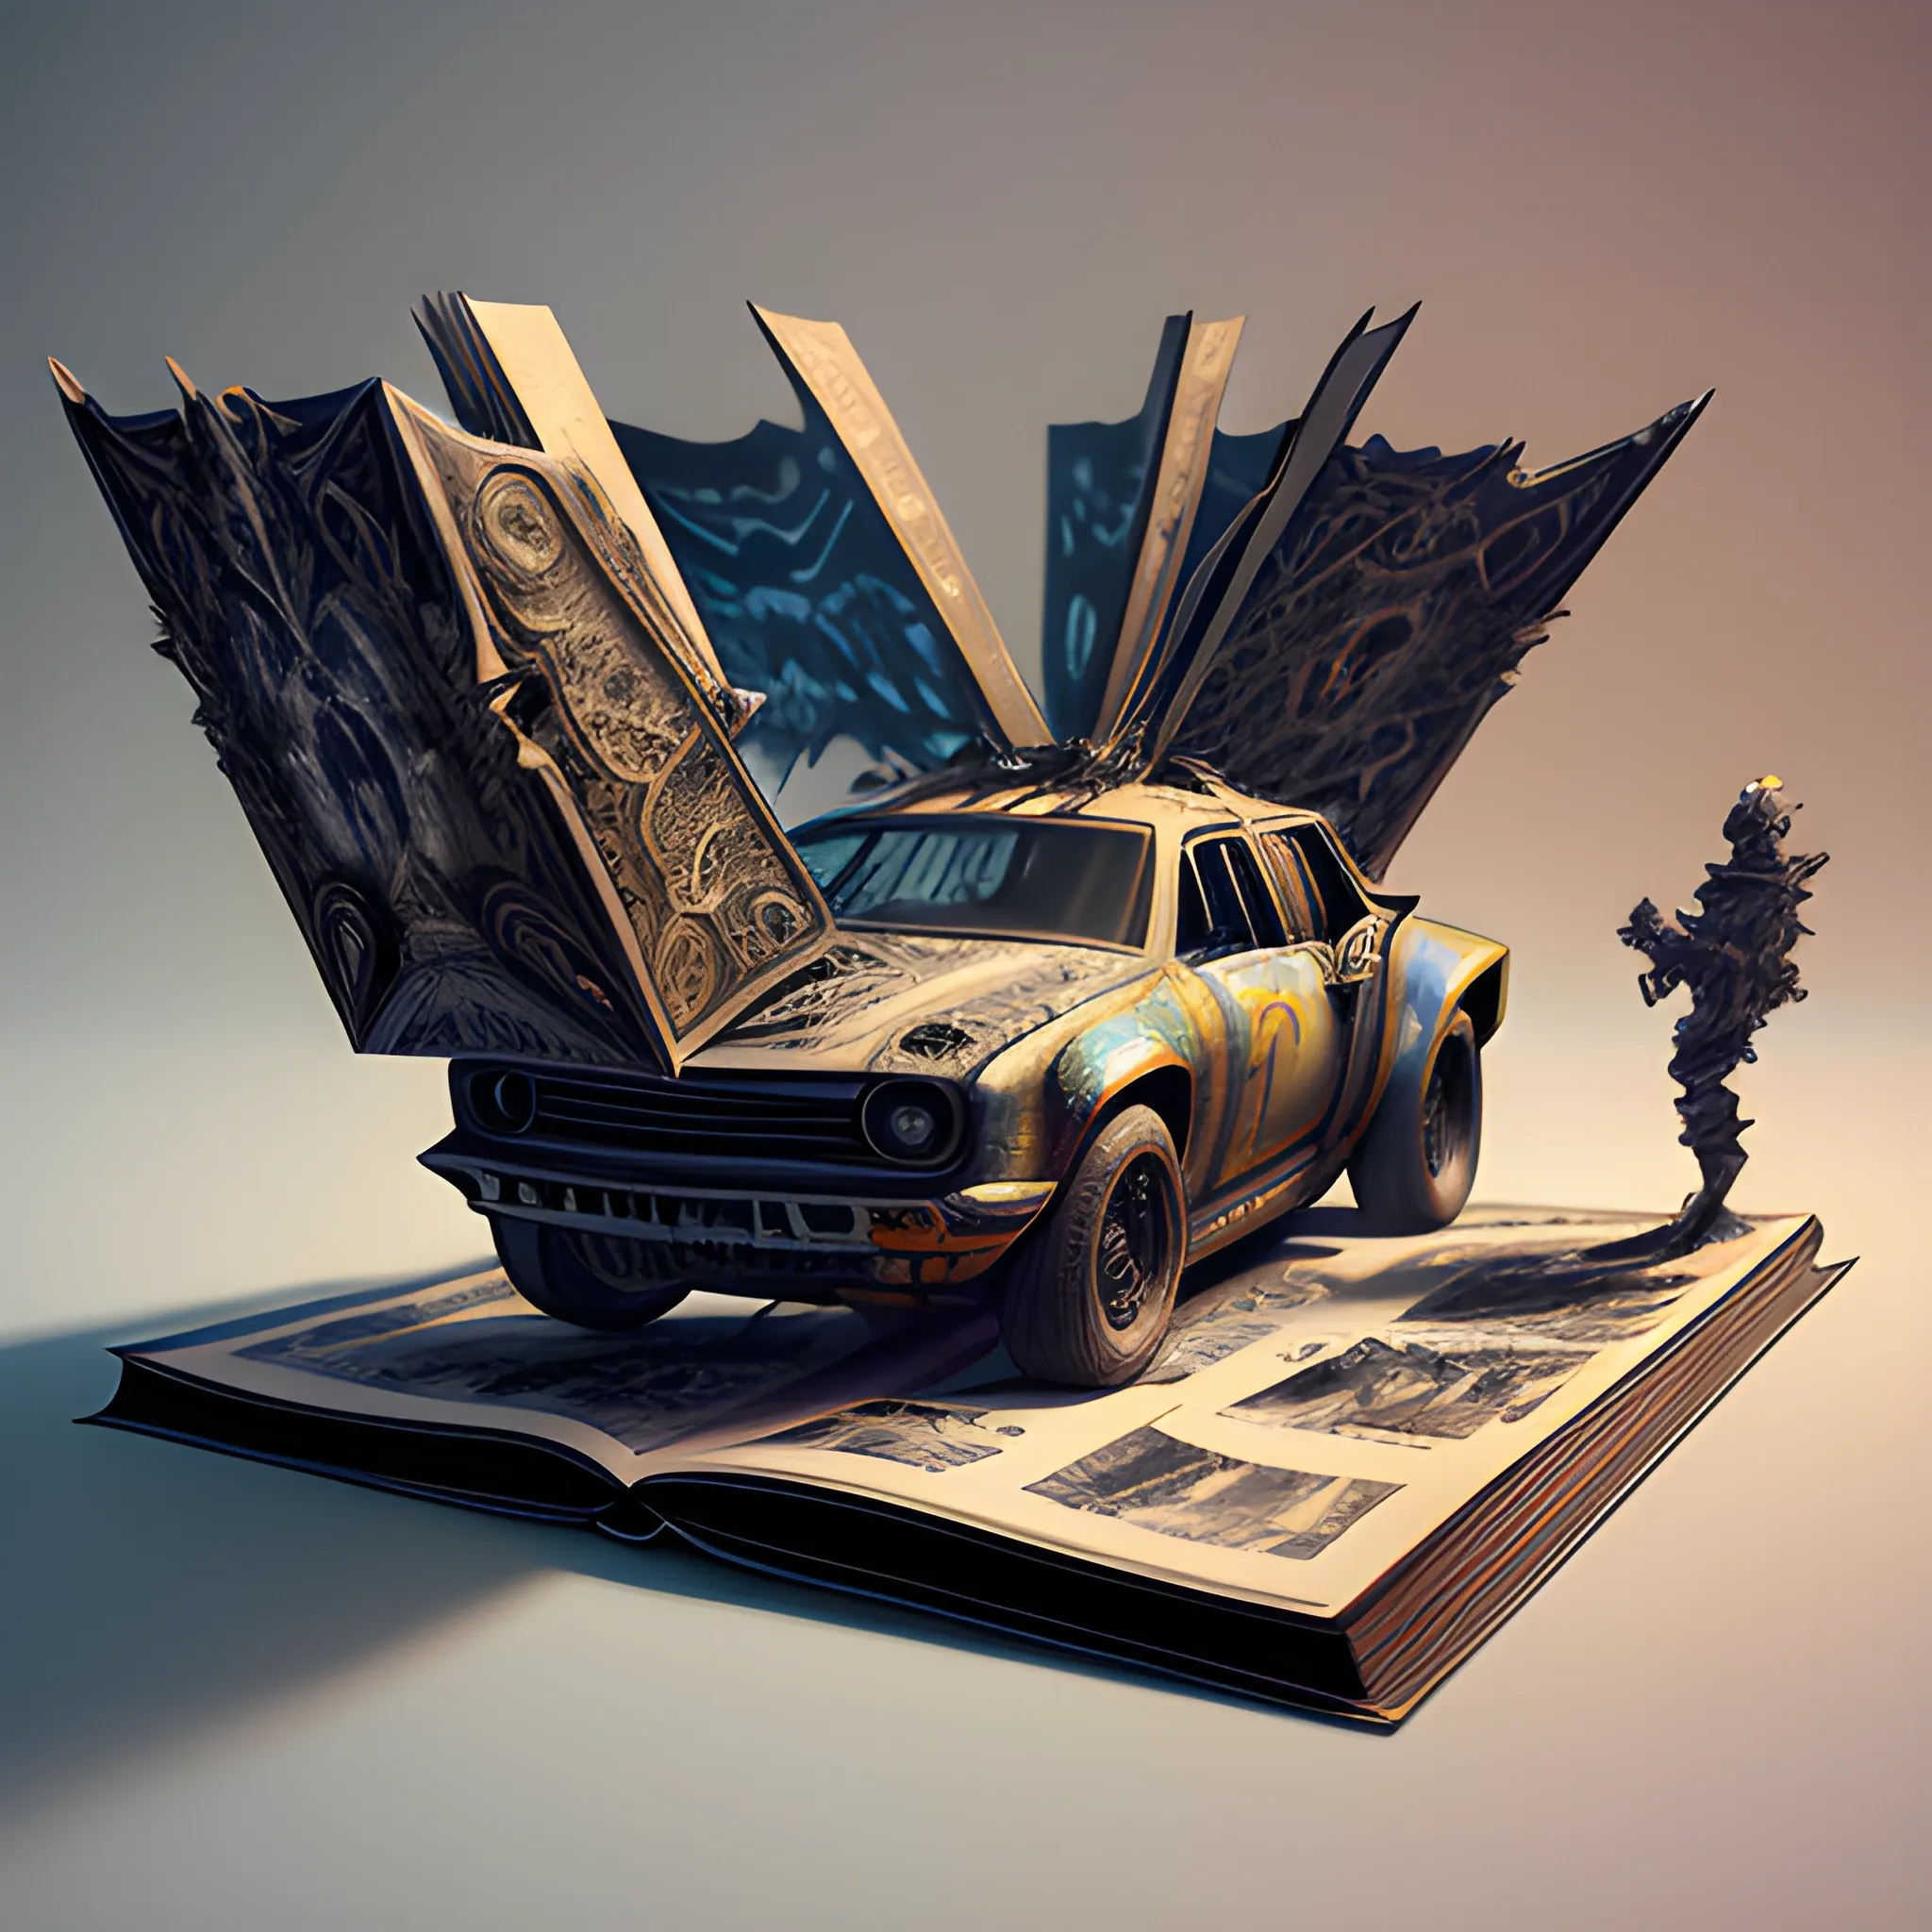 Pop-Up Book Art: book transforms into three-dimensional masterpieces, enchanted, magical, Mad Max theme, motion speed, CGSociety trend, Art-station trend, vibrant colors, cinematic character render, ultra high-quality model, epic, ominous undertone, highly detailed, production cinematic character render by greg rutkowski